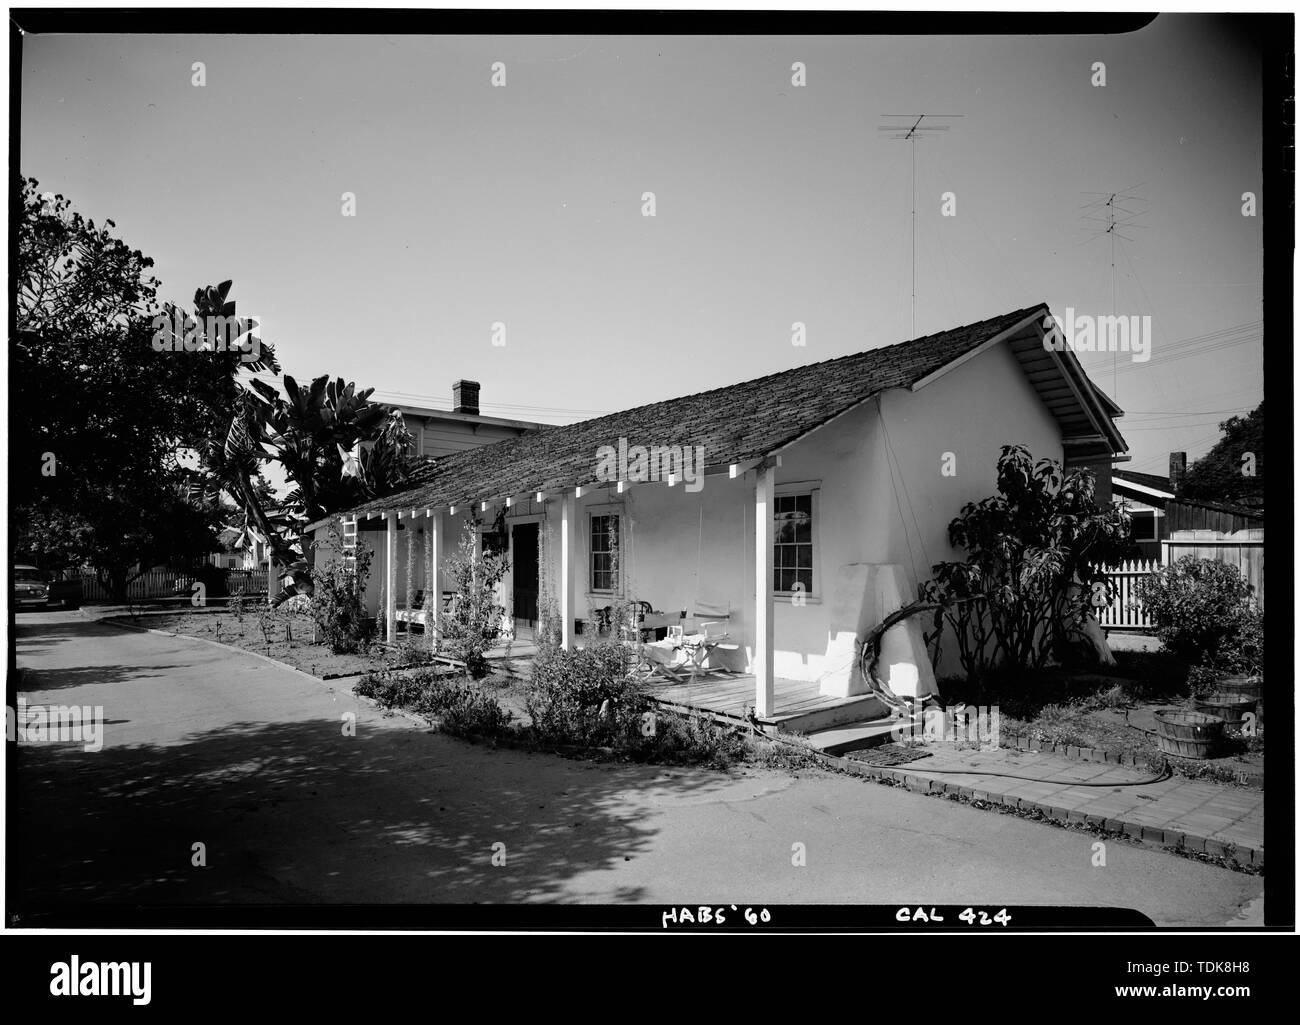 October 1960 VIEW OF ADOBE WING - George Derby House, 4017 Harney Street, San Diego, San Diego County, CA Stock Photo